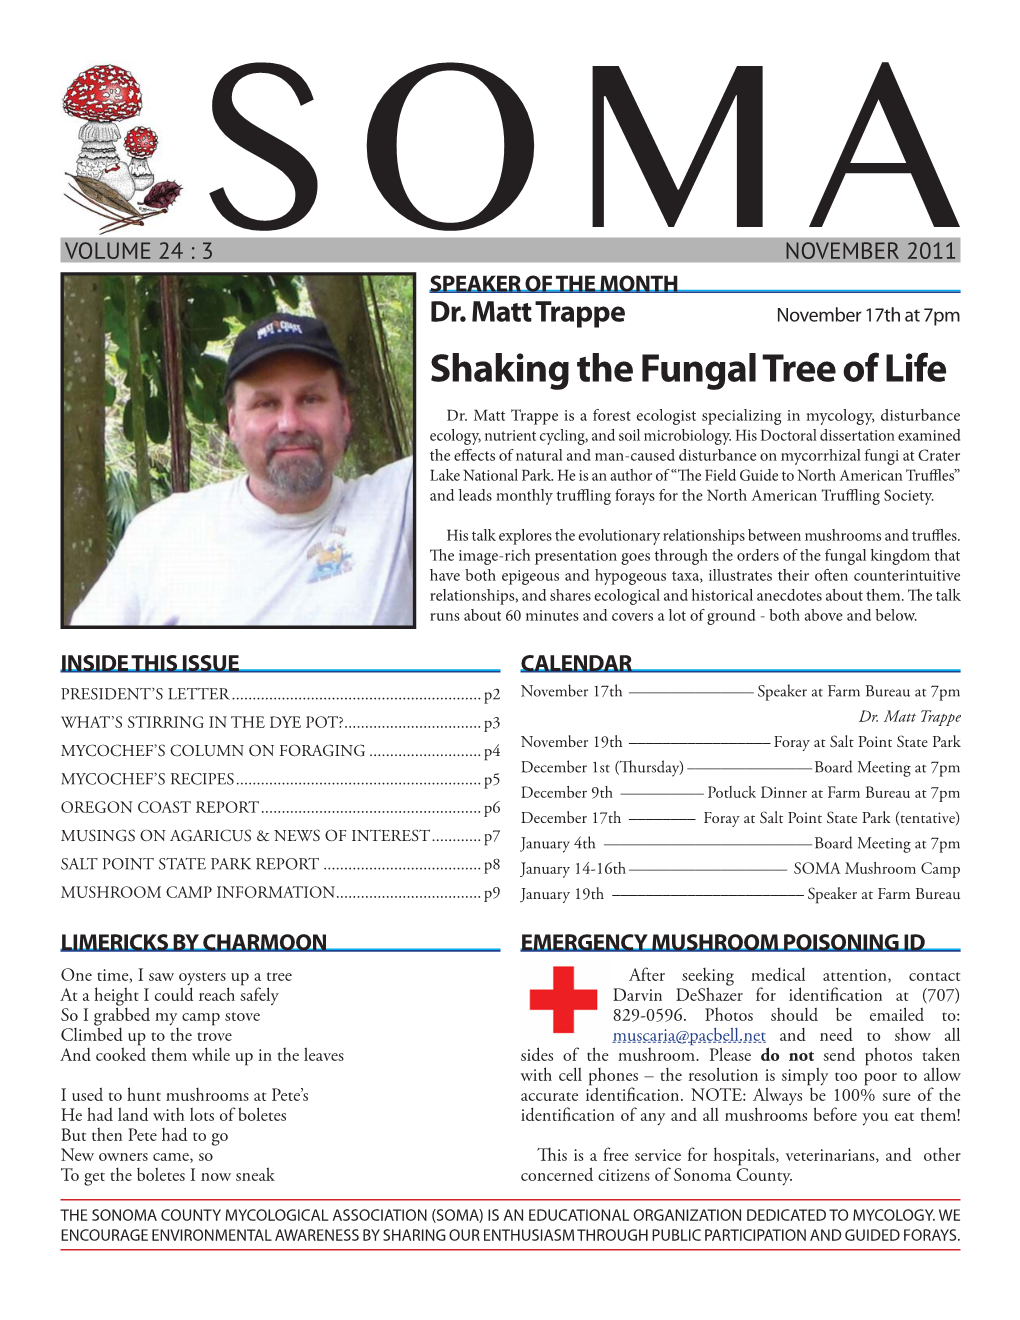 Shaking the Fungal Tree of Life